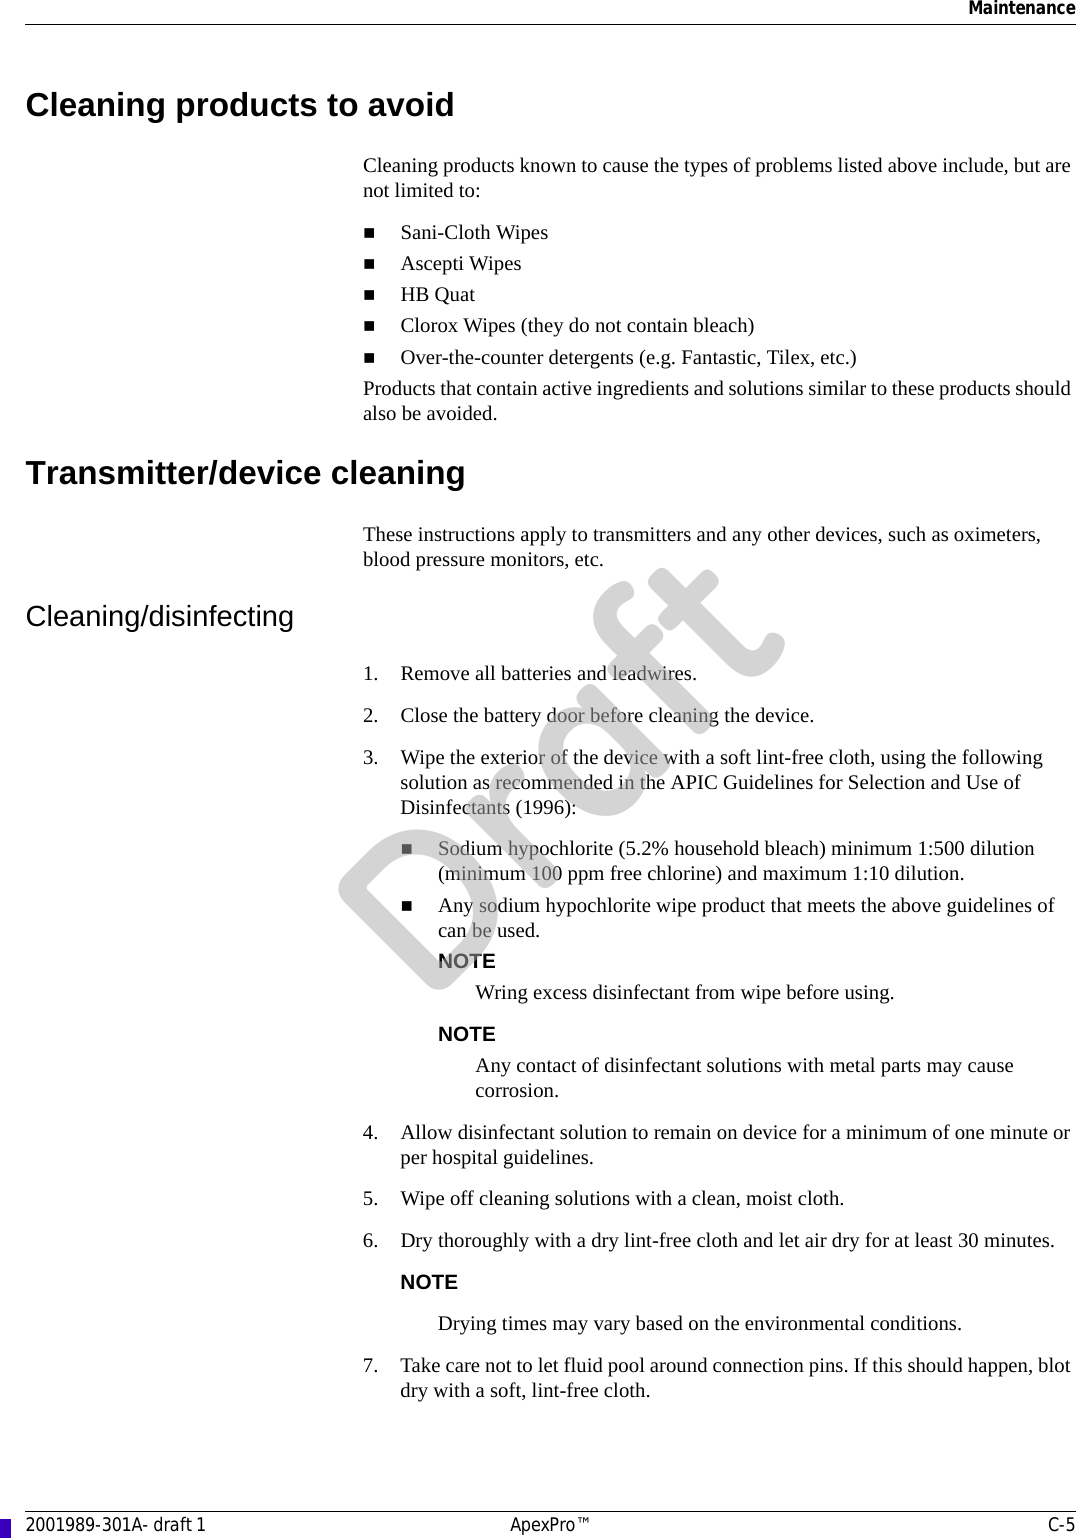 Maintenance2001989-301A- draft 1 ApexPro™ C-5Cleaning products to avoidCleaning products known to cause the types of problems listed above include, but are not limited to:Sani-Cloth Wipes Ascepti WipesHB QuatClorox Wipes (they do not contain bleach)Over-the-counter detergents (e.g. Fantastic, Tilex, etc.)Products that contain active ingredients and solutions similar to these products should also be avoided.Transmitter/device cleaningThese instructions apply to transmitters and any other devices, such as oximeters, blood pressure monitors, etc. Cleaning/disinfecting1. Remove all batteries and leadwires.2. Close the battery door before cleaning the device.3. Wipe the exterior of the device with a soft lint-free cloth, using the following solution as recommended in the APIC Guidelines for Selection and Use of Disinfectants (1996):Sodium hypochlorite (5.2% household bleach) minimum 1:500 dilution (minimum 100 ppm free chlorine) and maximum 1:10 dilution.Any sodium hypochlorite wipe product that meets the above guidelines of can be used.NOTEWring excess disinfectant from wipe before using.NOTEAny contact of disinfectant solutions with metal parts may cause corrosion.4. Allow disinfectant solution to remain on device for a minimum of one minute or per hospital guidelines.5. Wipe off cleaning solutions with a clean, moist cloth.6. Dry thoroughly with a dry lint-free cloth and let air dry for at least 30 minutes.NOTEDrying times may vary based on the environmental conditions.7. Take care not to let fluid pool around connection pins. If this should happen, blot dry with a soft, lint-free cloth.Draft